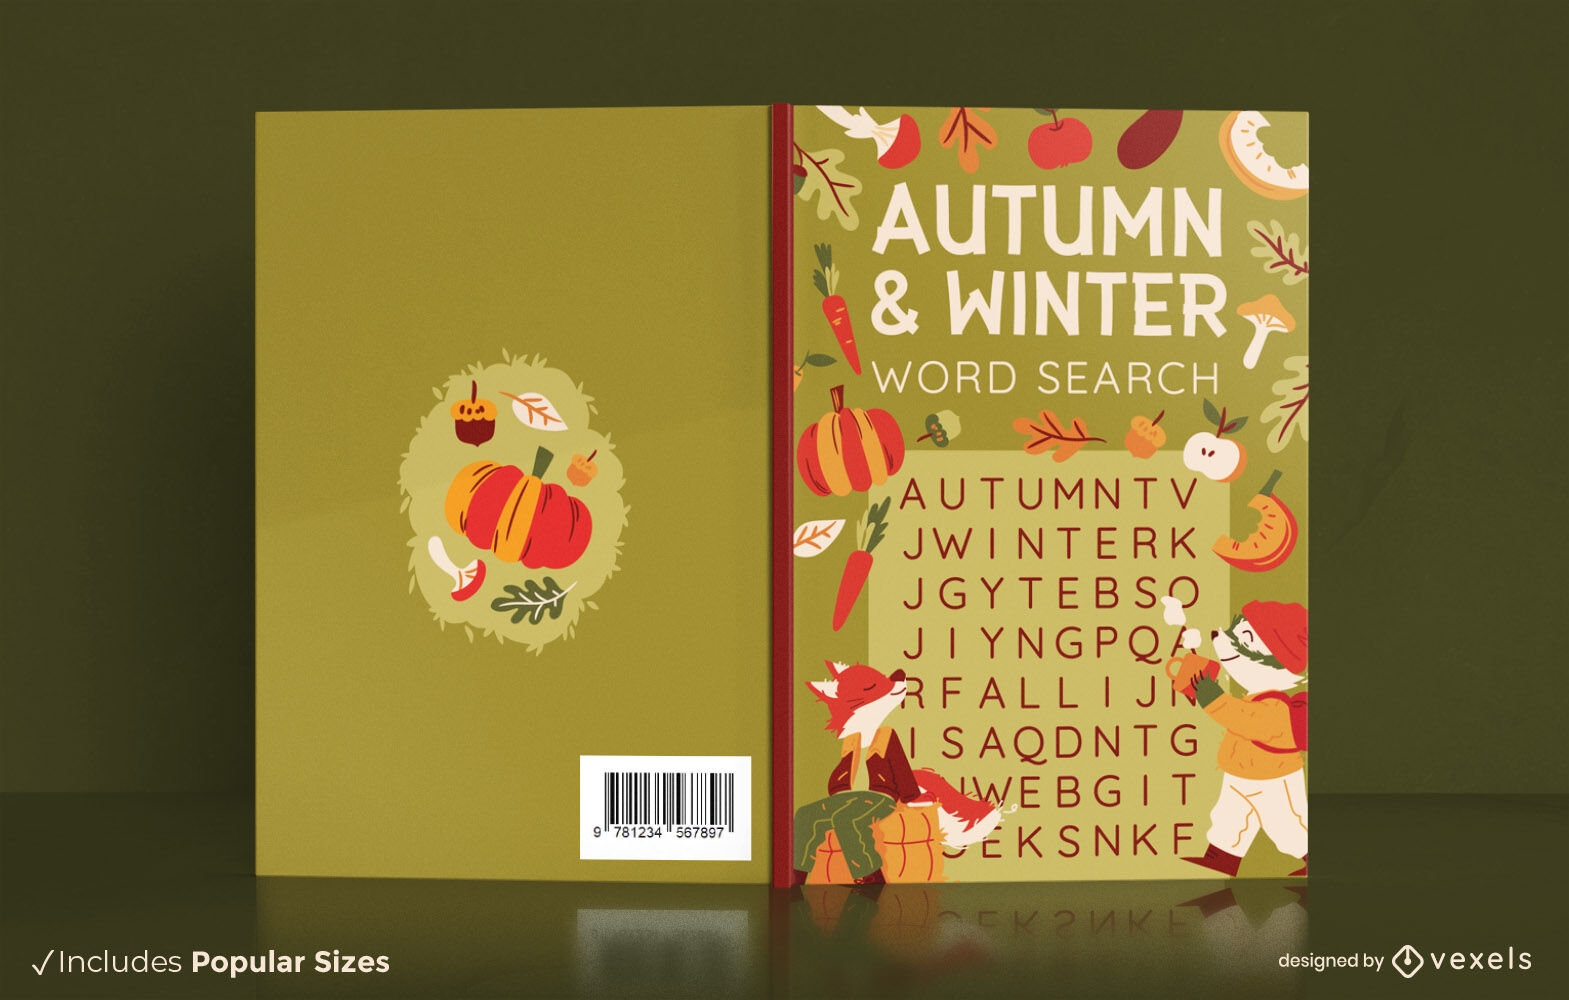 Autumn and winter word search book cover design